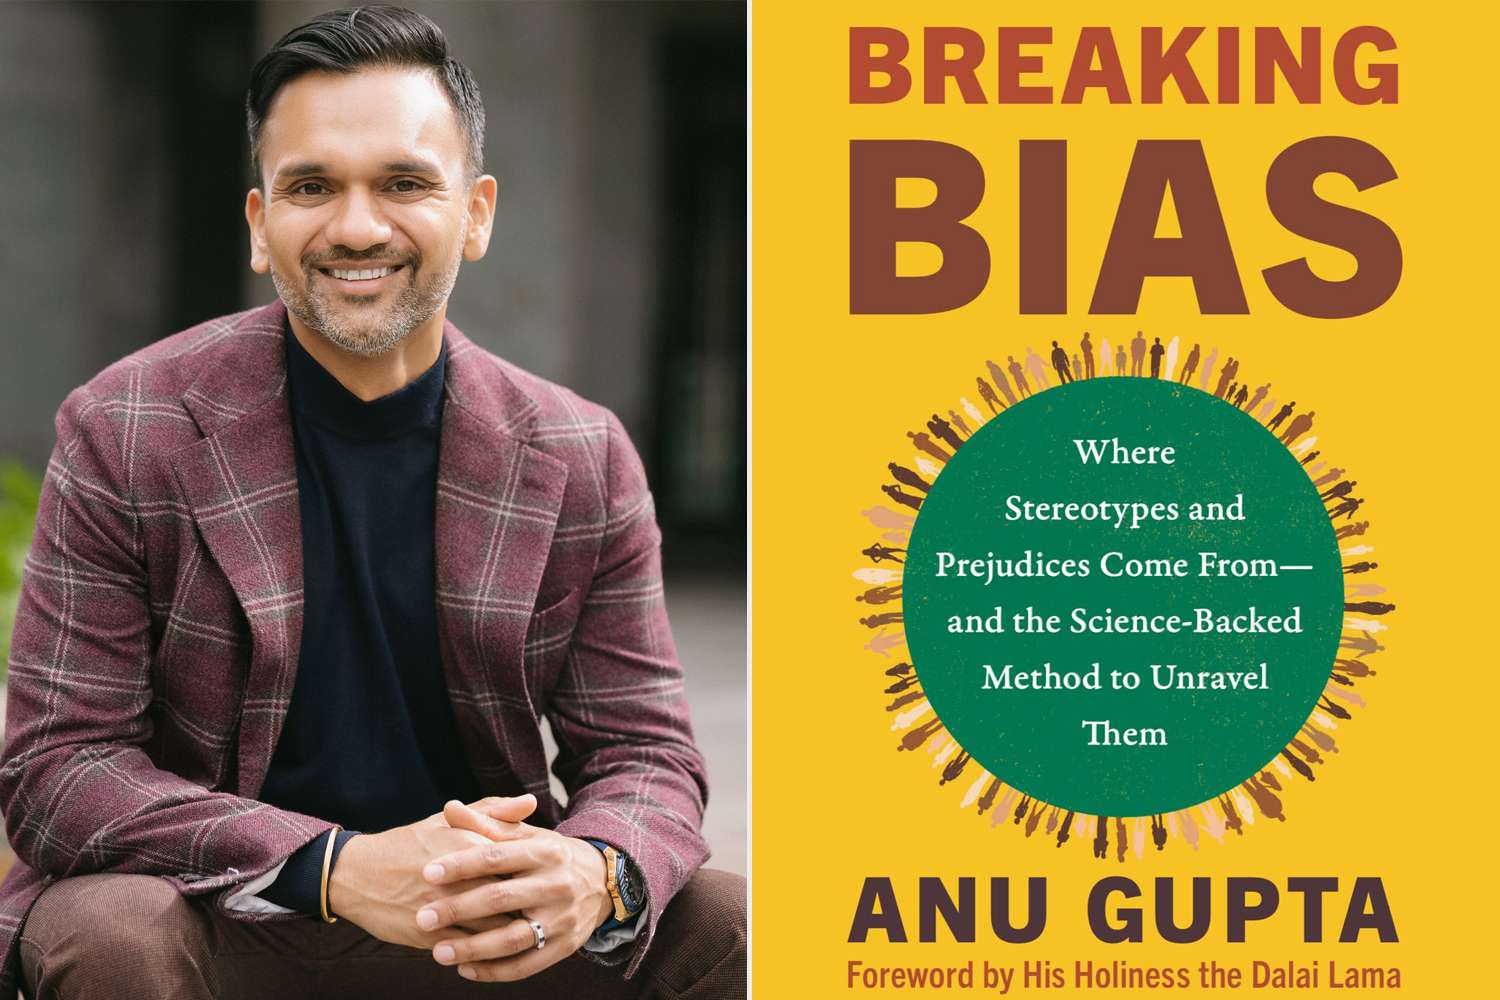 CEO Anu Gupta To Publish New Book, Including a Foreword From the Dalai Lama (Exclusive)